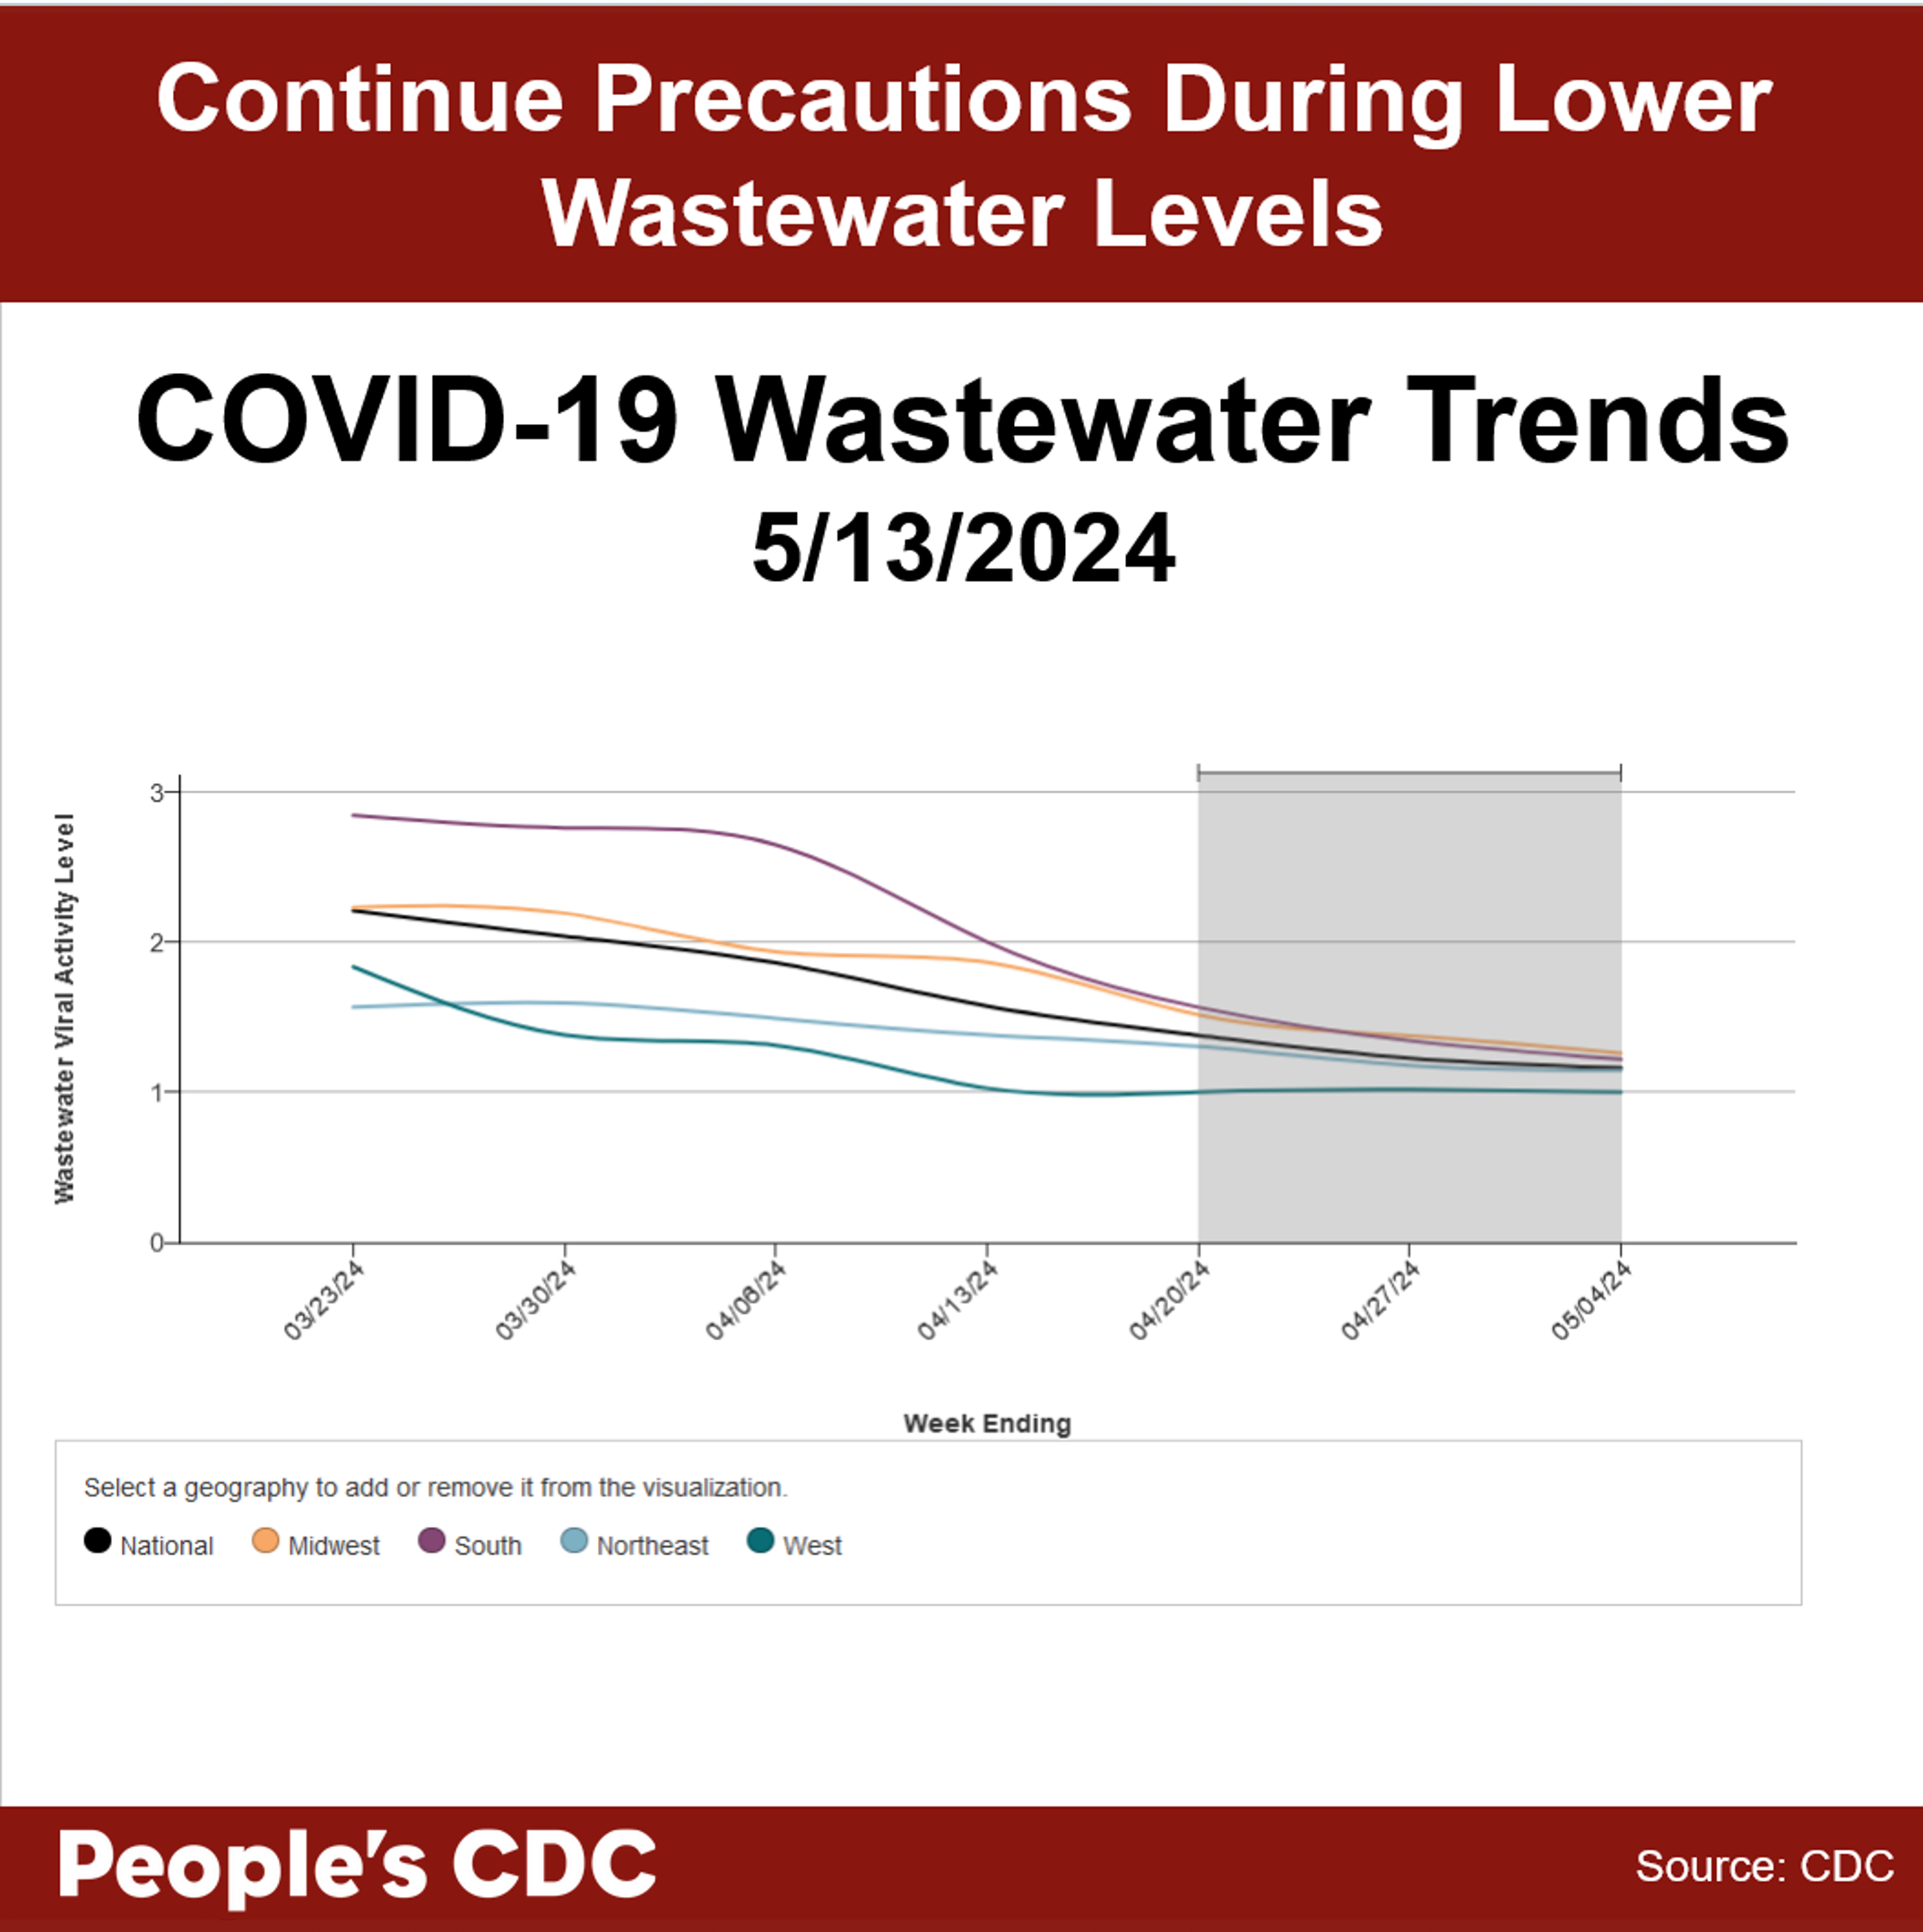 A line graph with the title, “COVID-19 Wastewater Trends 5/13/2024” with “Wastewater Viral Activity Level” indicated on the left-hand vertical axis, going from 0-5, and “Week Ending” across the horizontal axis, with date labels ranging from 3/23/24 to 4/20/24, with the graph extending through 5/04/24. A key at the bottom indicates line colors. National is black, Midwest is orange, South is purple, Northeast is light blue, and West is green. Overall, levels have trended downward and seem to be plateauing since last month. Within the gray-shaded provisional data provided for the last 2 weeks, all geographical regions plateau.. Text above the graph reads “Continue Precautions During Lower Wastewater Levels. Text below: People’s CDC. Source: CDC.”